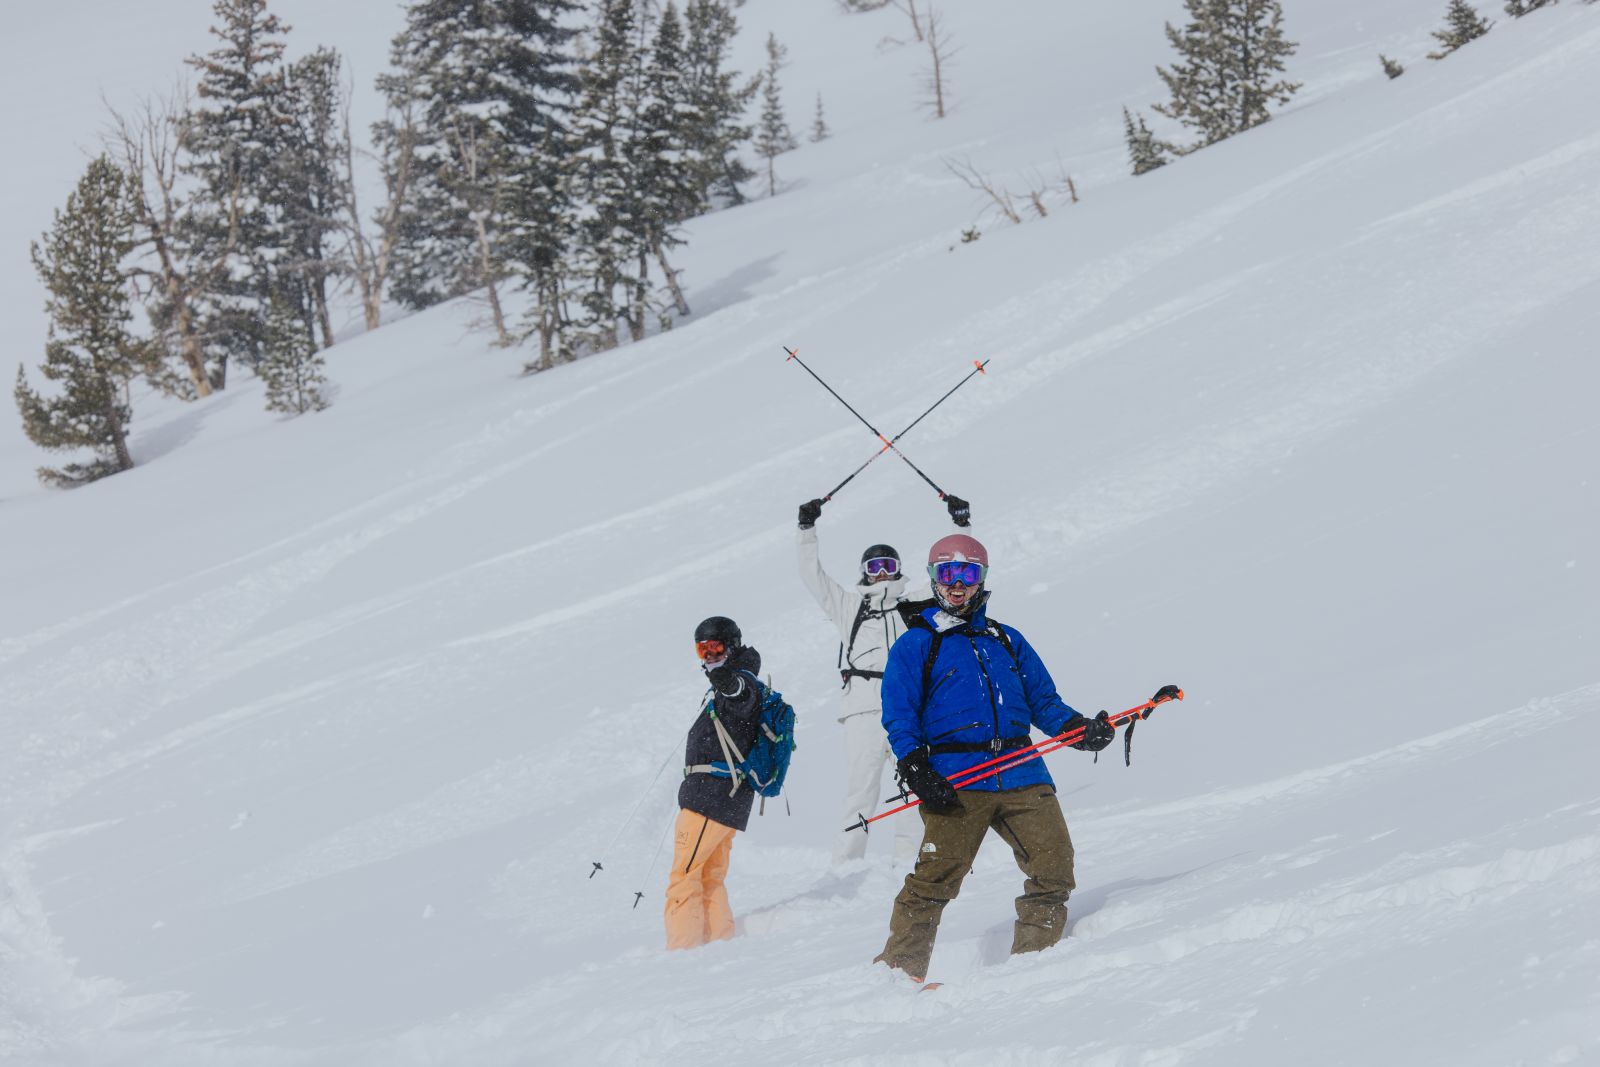 The Ski Monster crew testing skis in Jackson Hole, WY